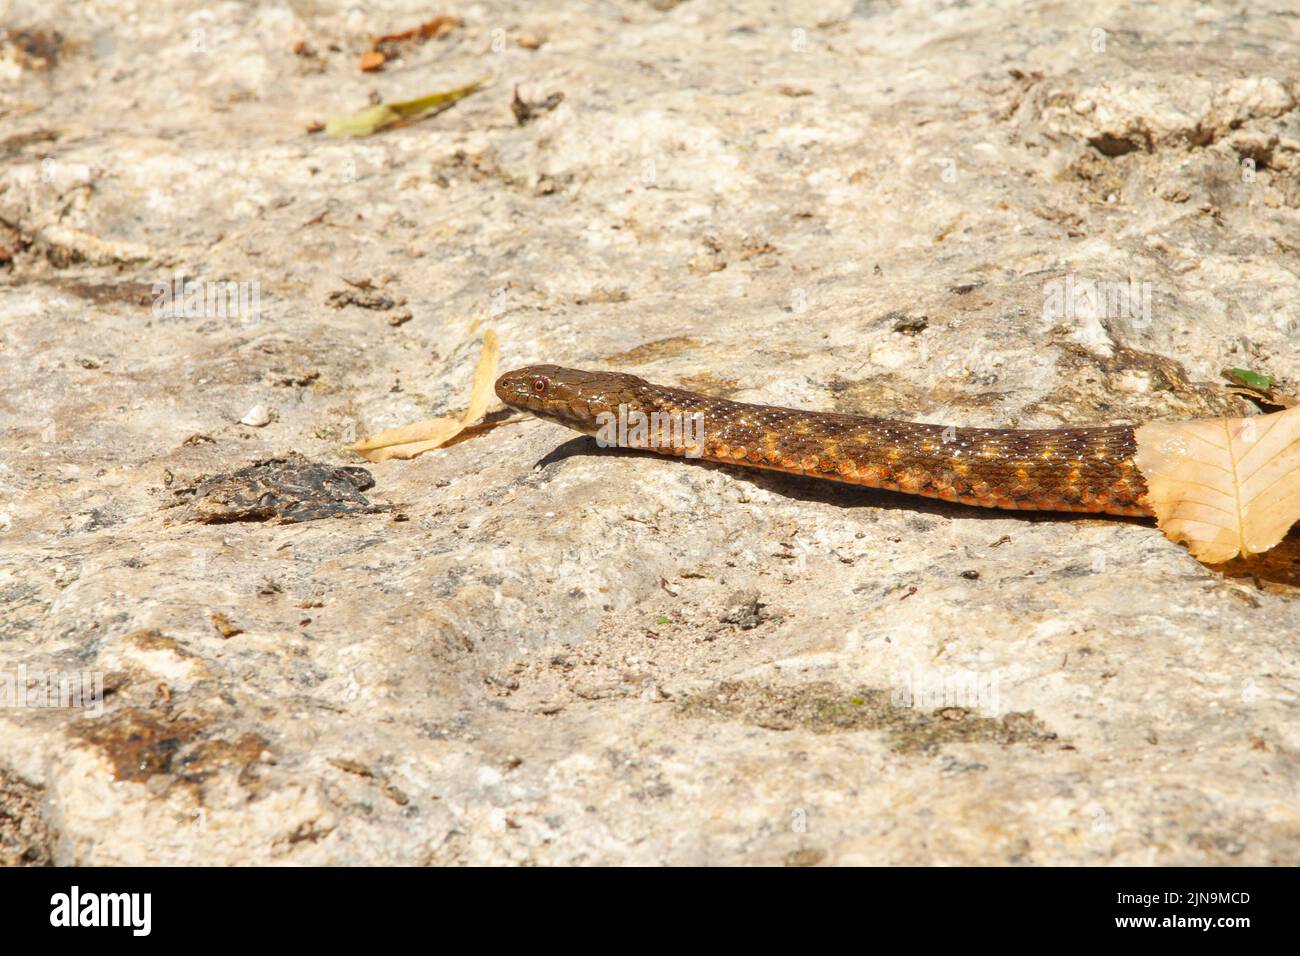 A dice snake crawling on the rock Stock Photo